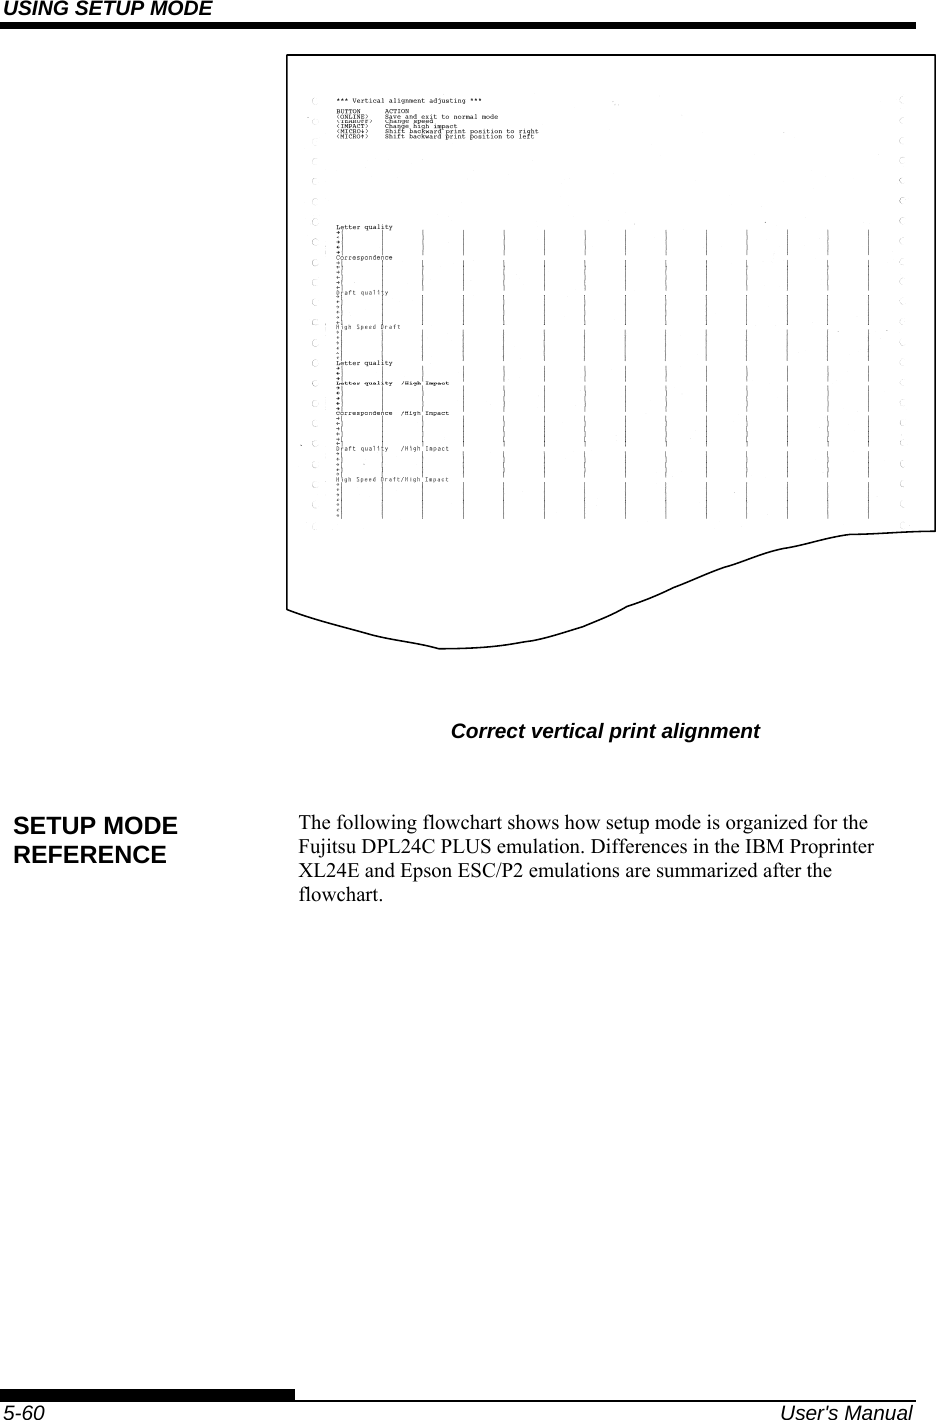 USING SETUP MODE    5-60  User&apos;s Manual      Correct vertical print alignment  The following flowchart shows how setup mode is organized for the Fujitsu DPL24C PLUS emulation. Differences in the IBM Proprinter XL24E and Epson ESC/P2 emulations are summarized after the flowchart.  SETUP MODE REFERENCE 